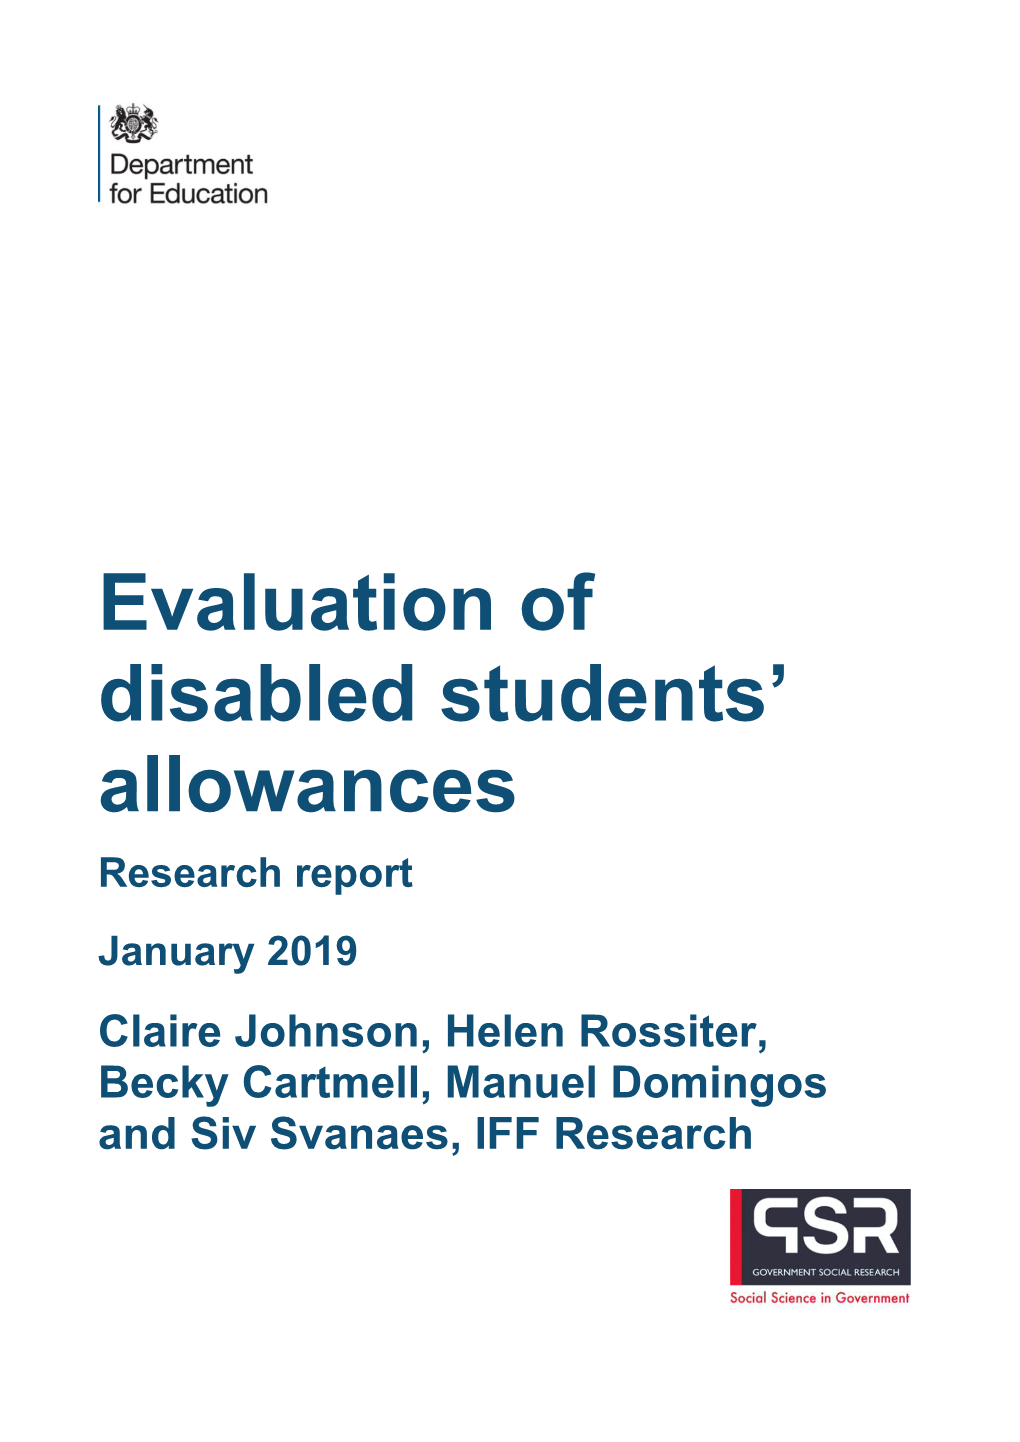 Evaluation of Disabled Students' Allowances